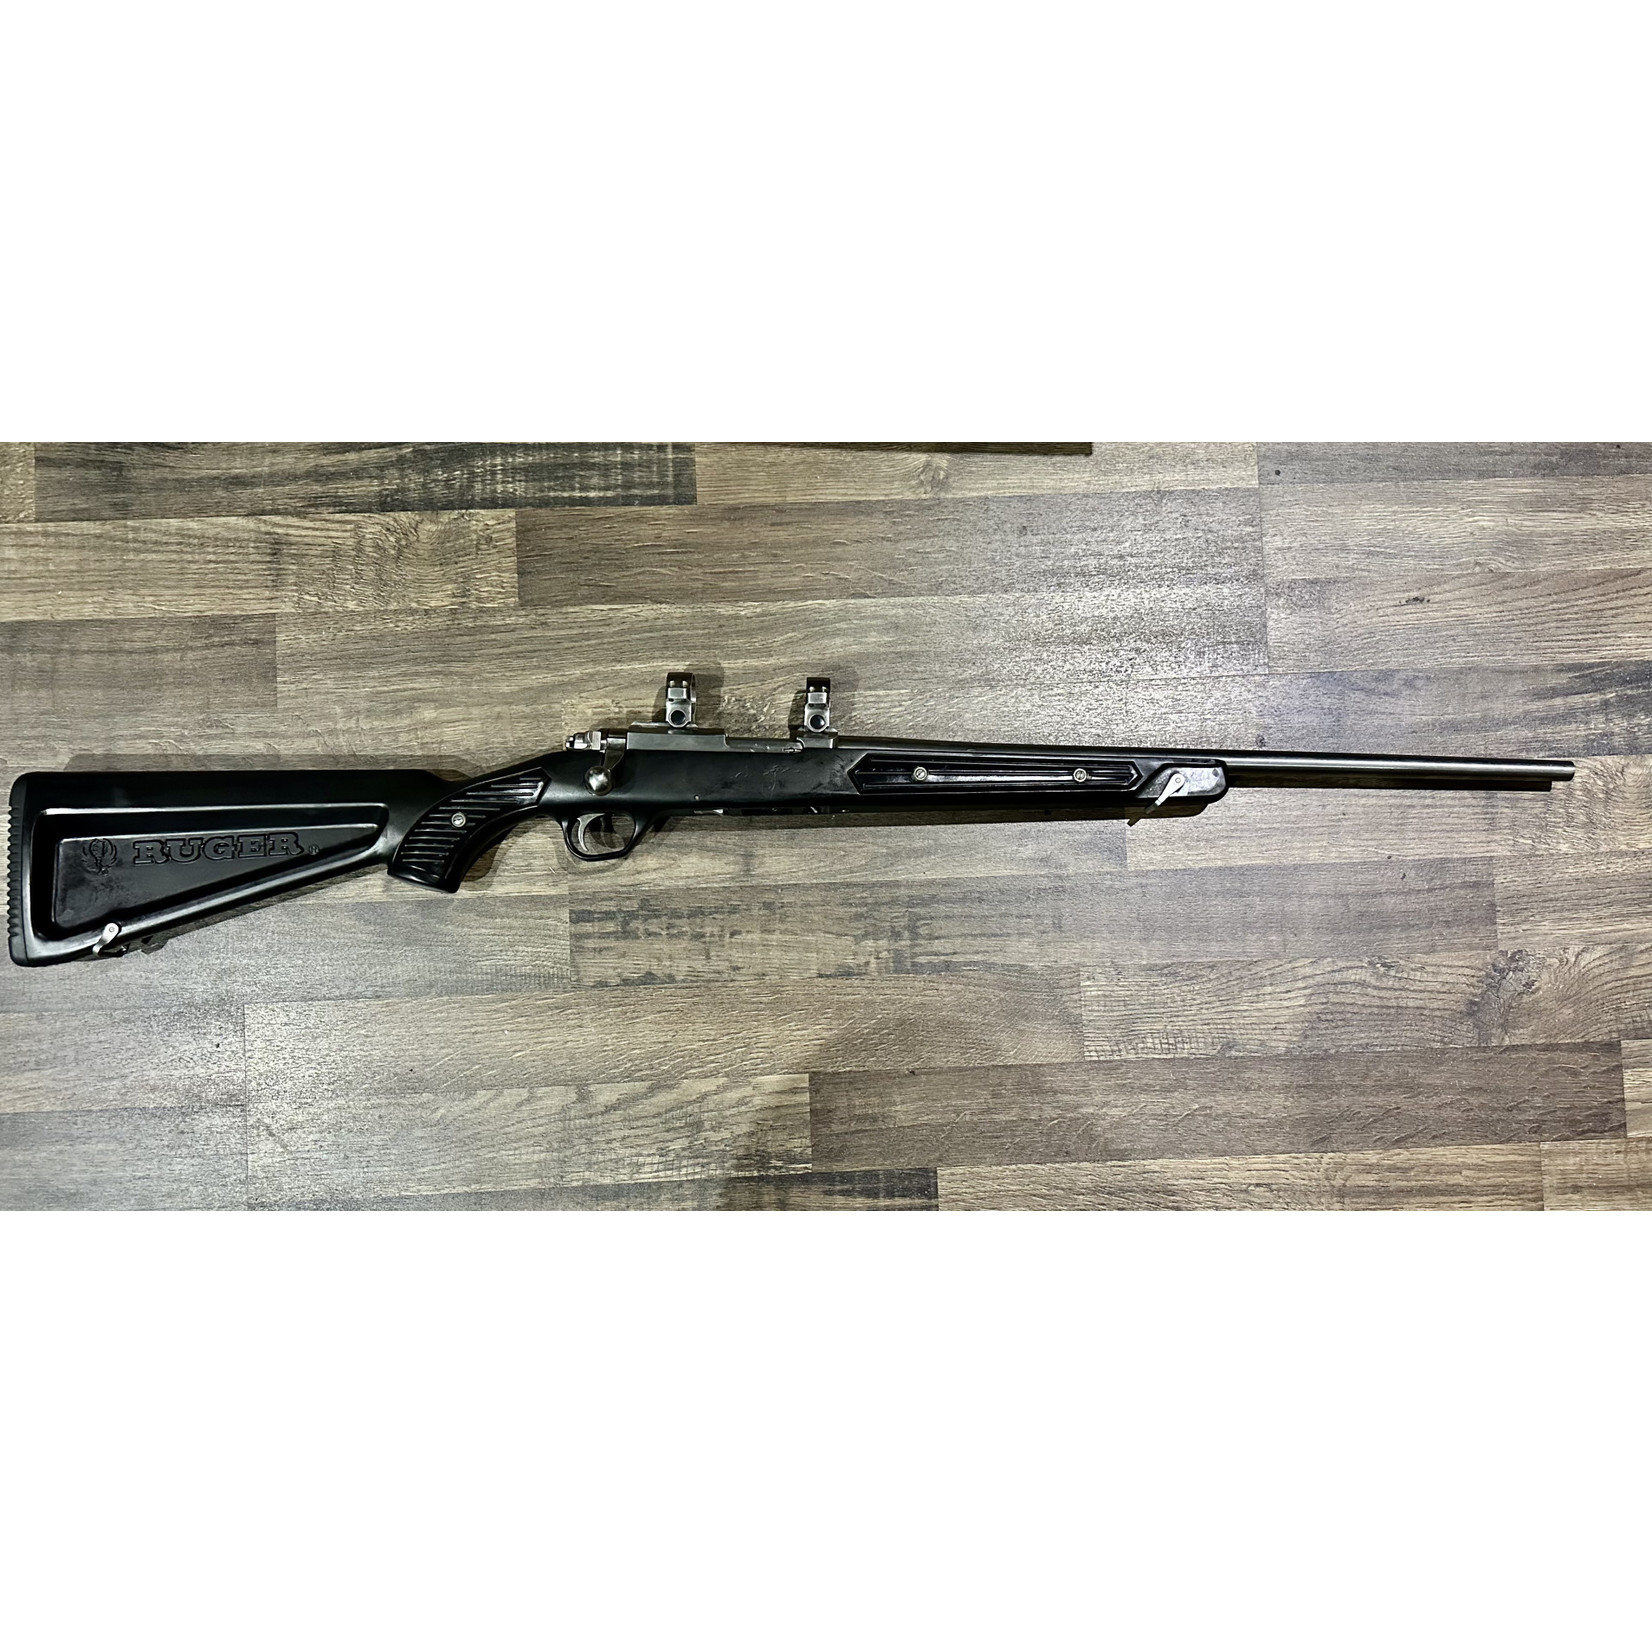 Ruger Pre Owned Ruger 77/22M Stainless 22WMR - 510mm bbl